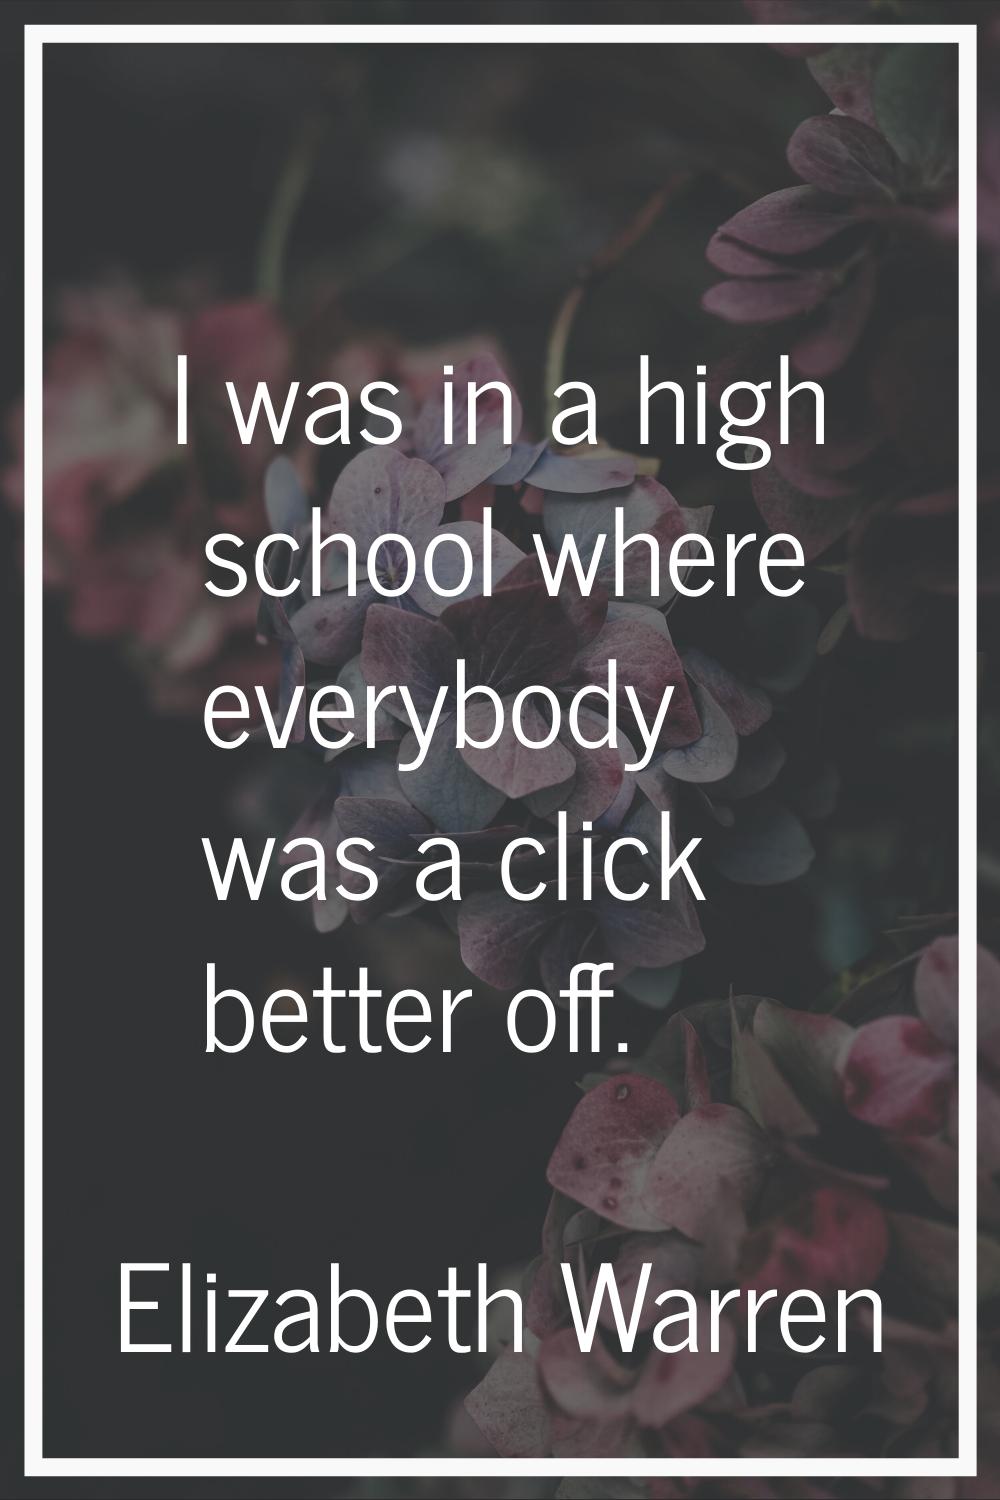 I was in a high school where everybody was a click better off.